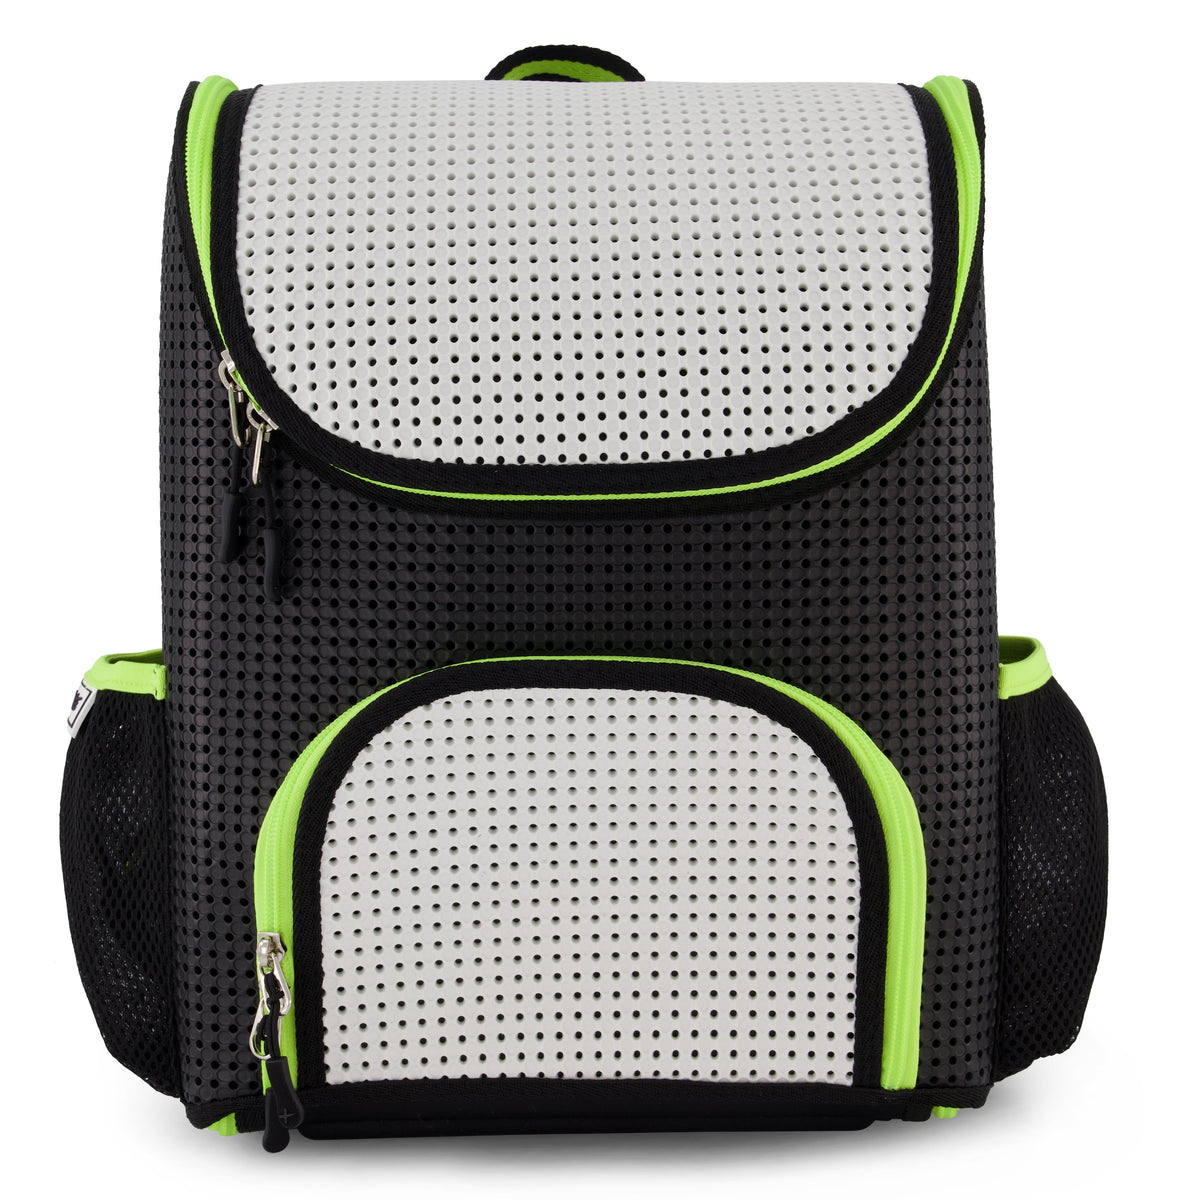 Backpack STUDENT Neon Lime